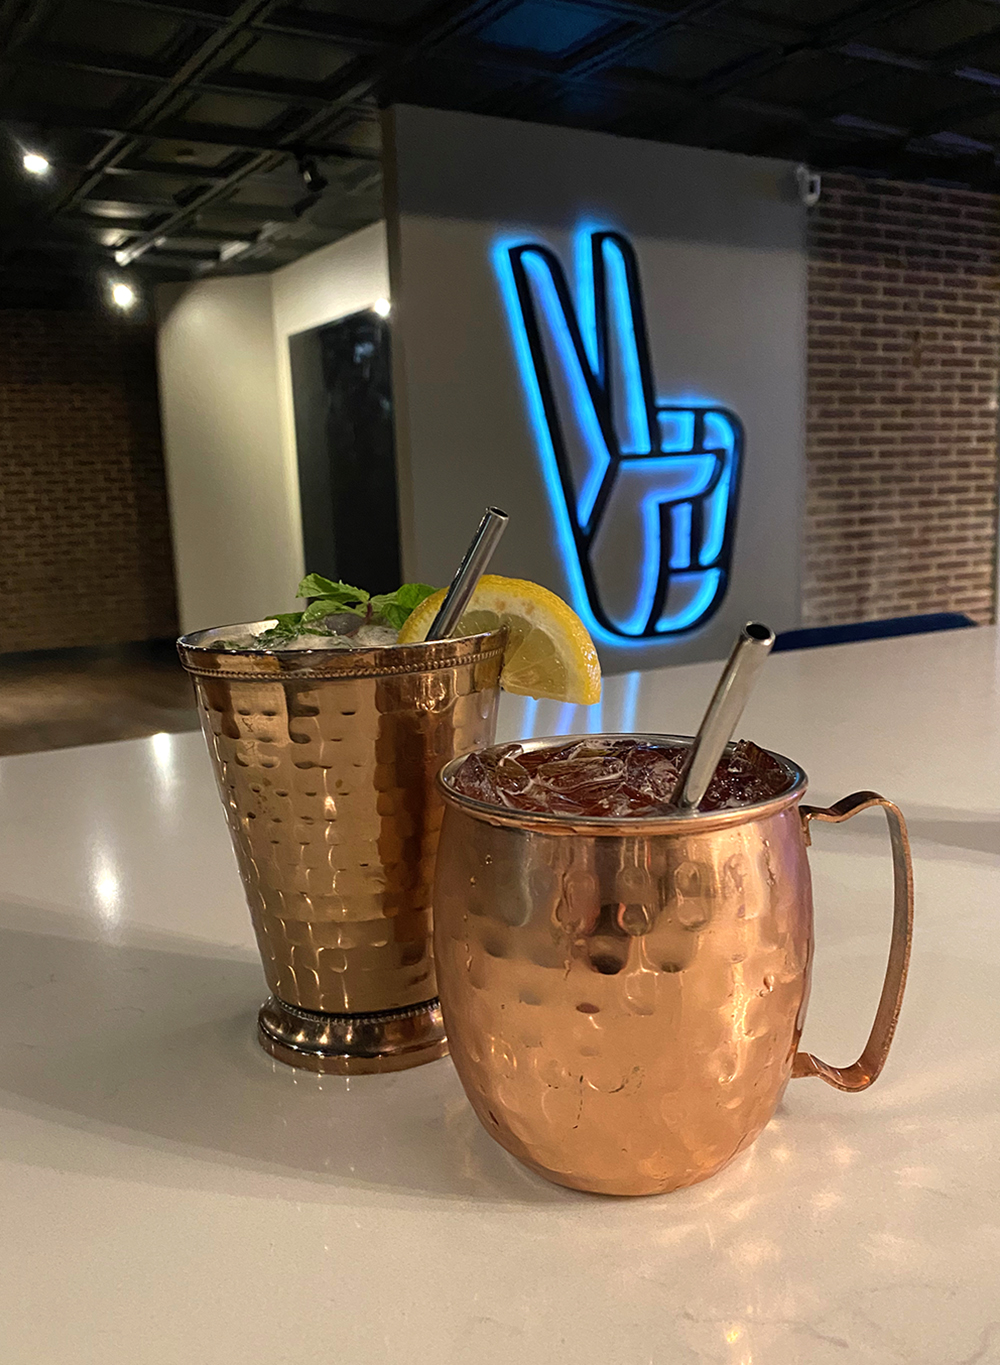 Two drinks in copper mugs on a bar with a blue backlit peace sign sculpture in the background